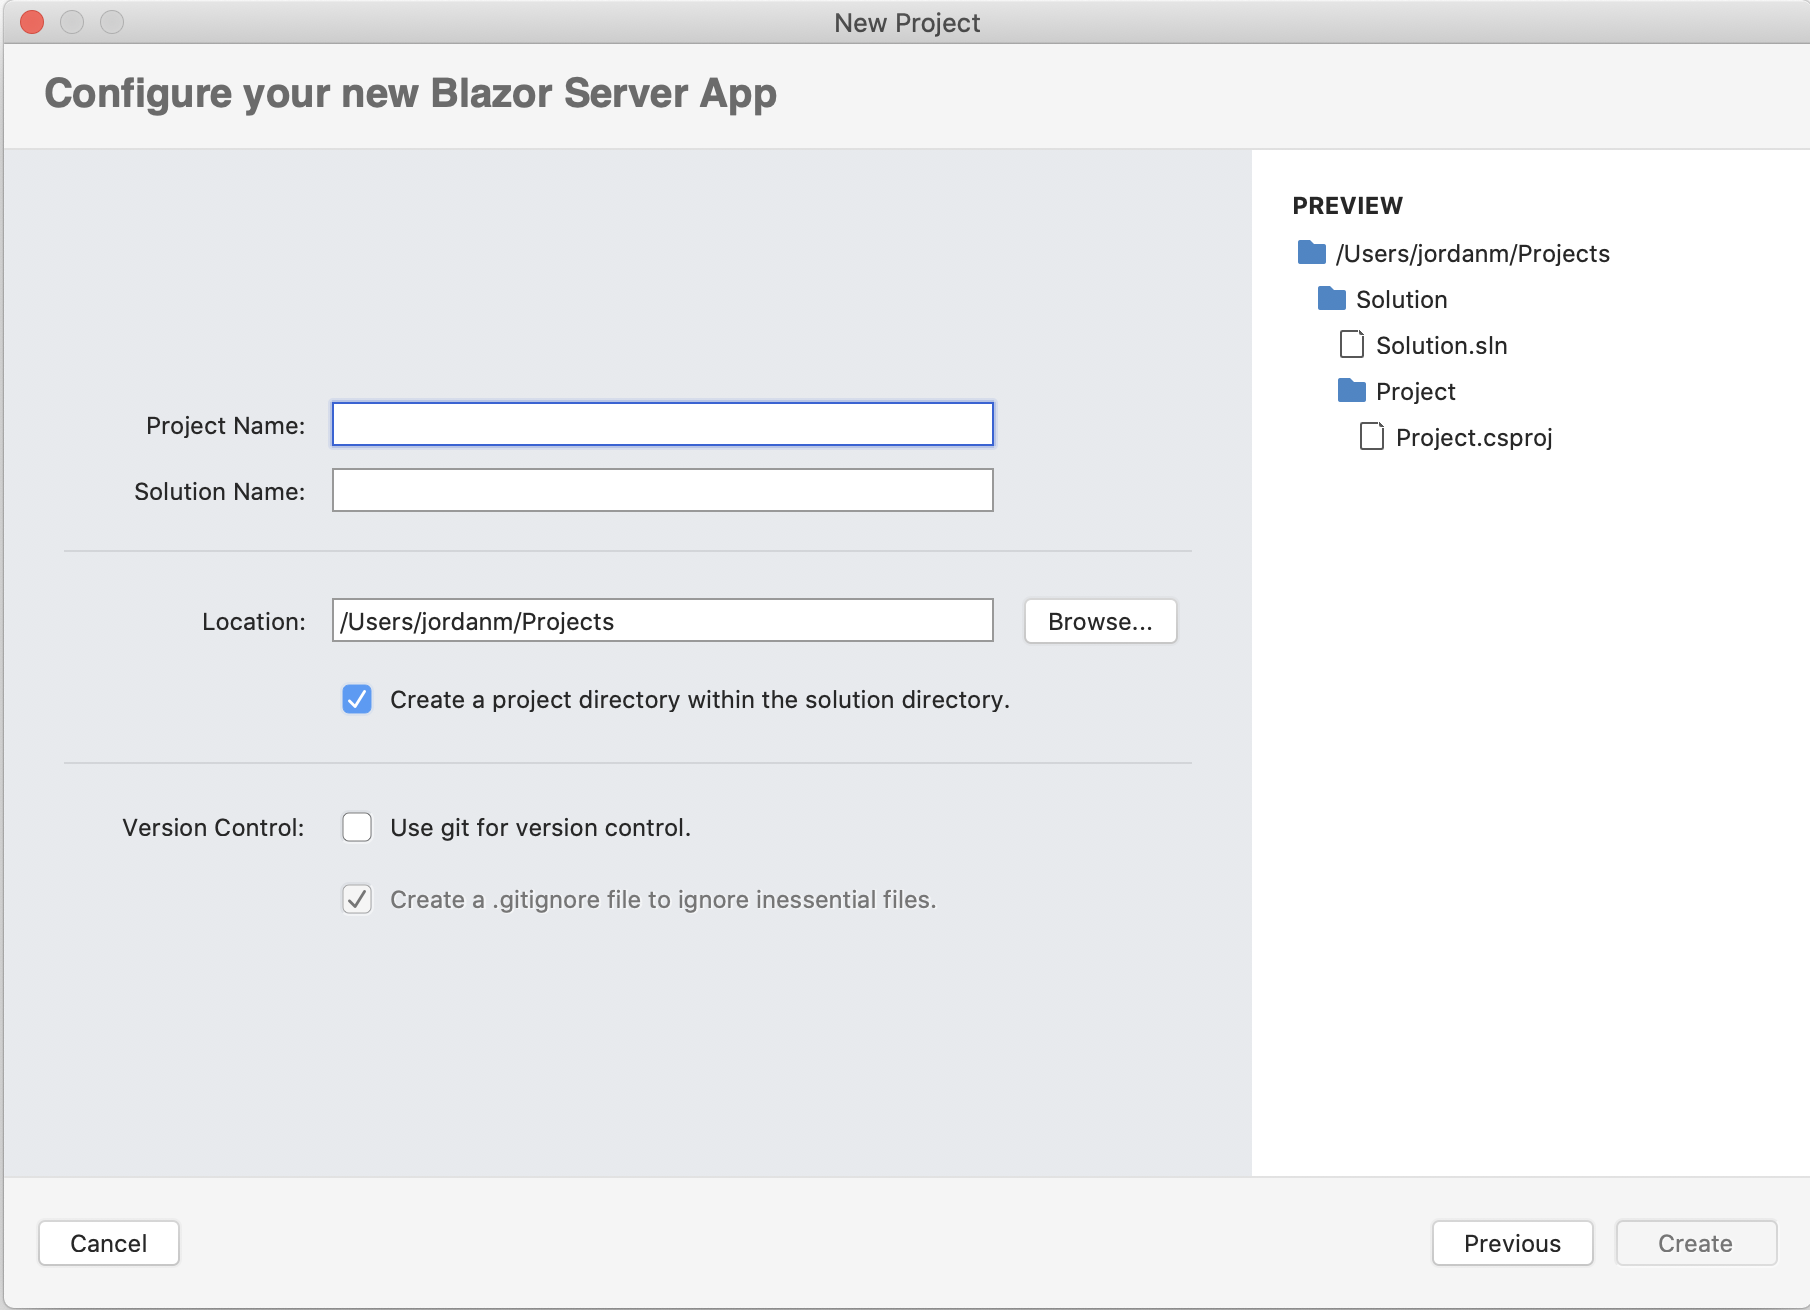 Configure your new Blazor Server App dialog displayed while entering Project Name